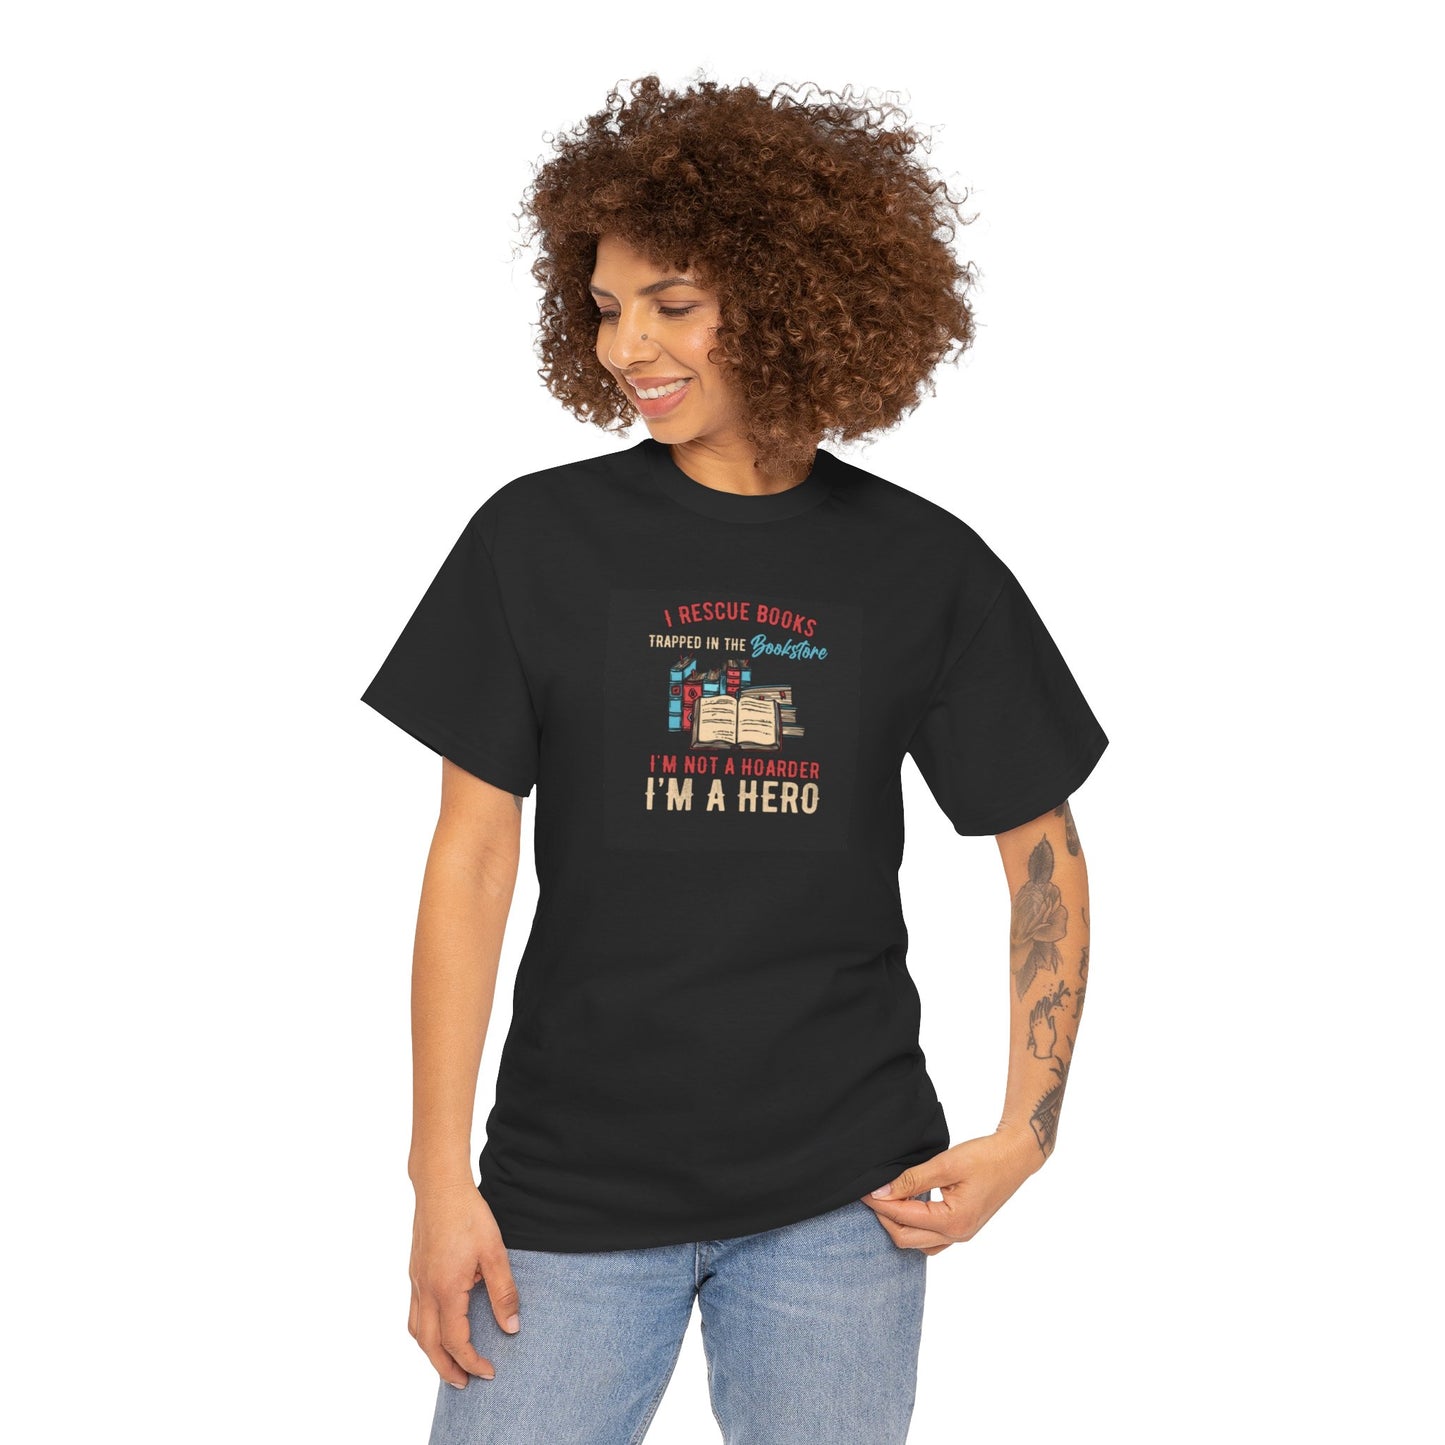 Book Lover's T-Shirt 'I Rescue Books from the Bookstore'